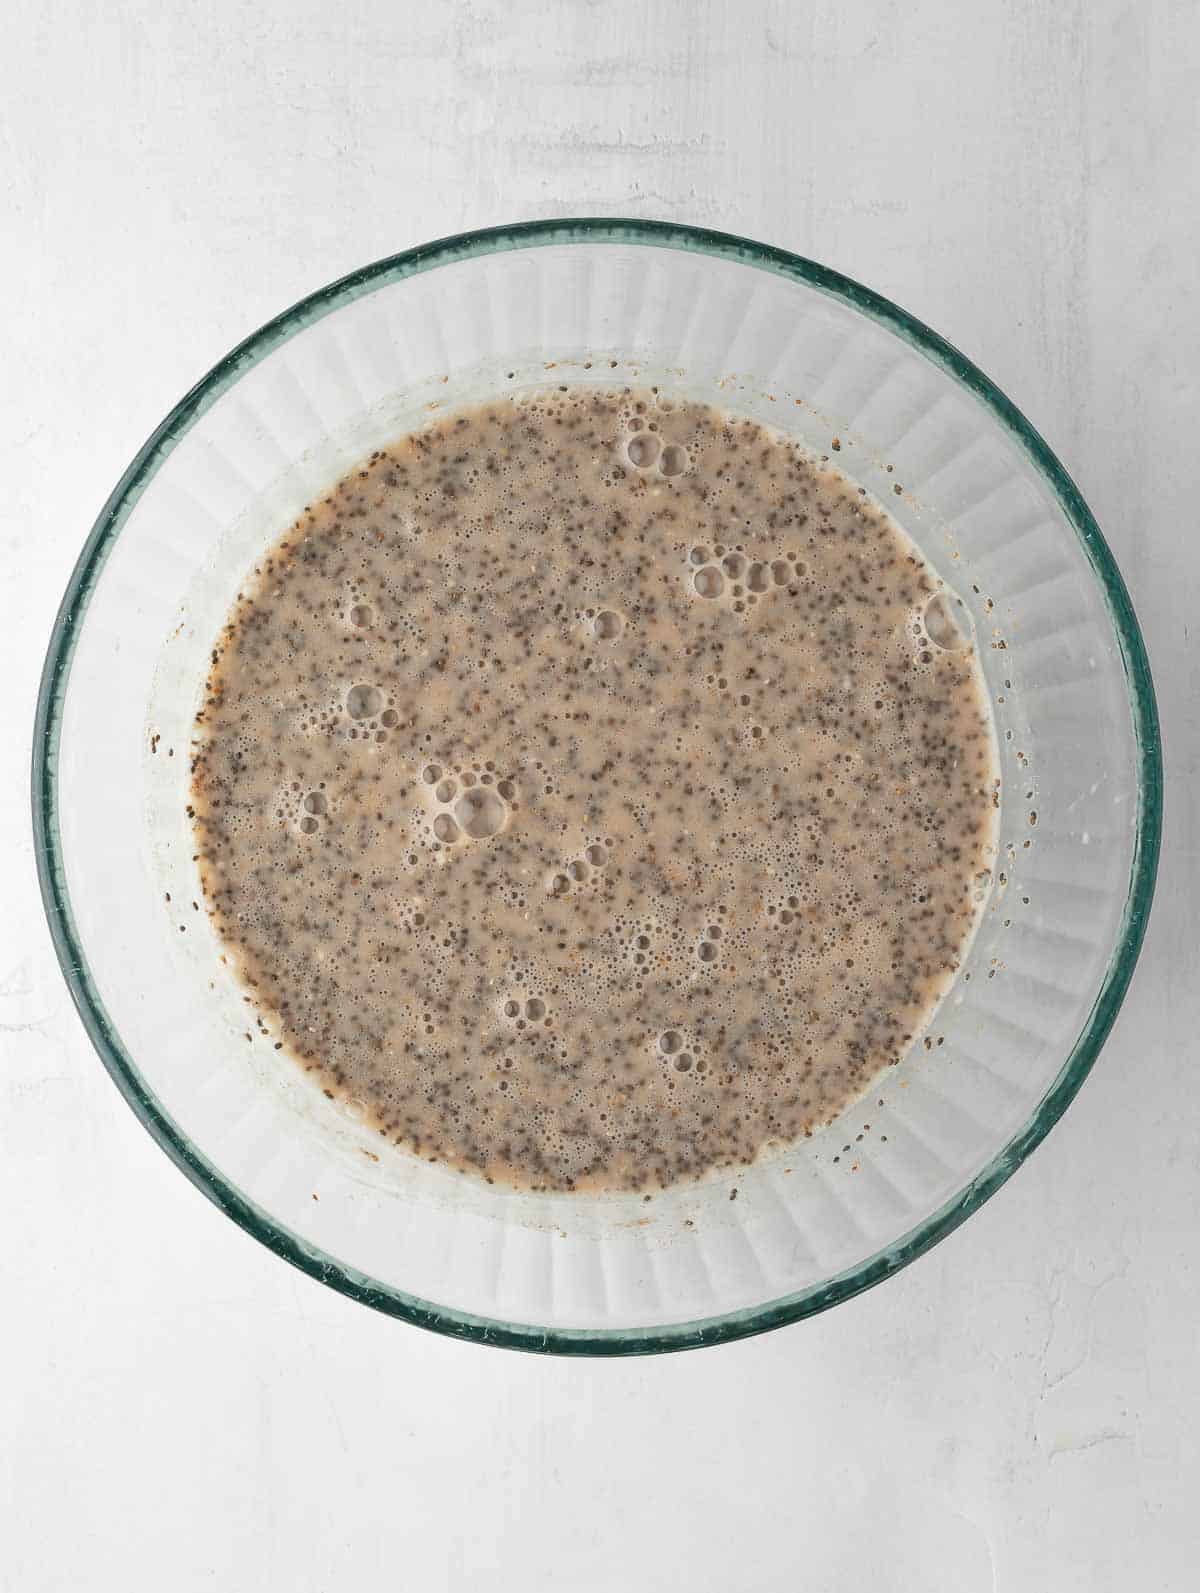 chia mixed with almond milk in a bowl.